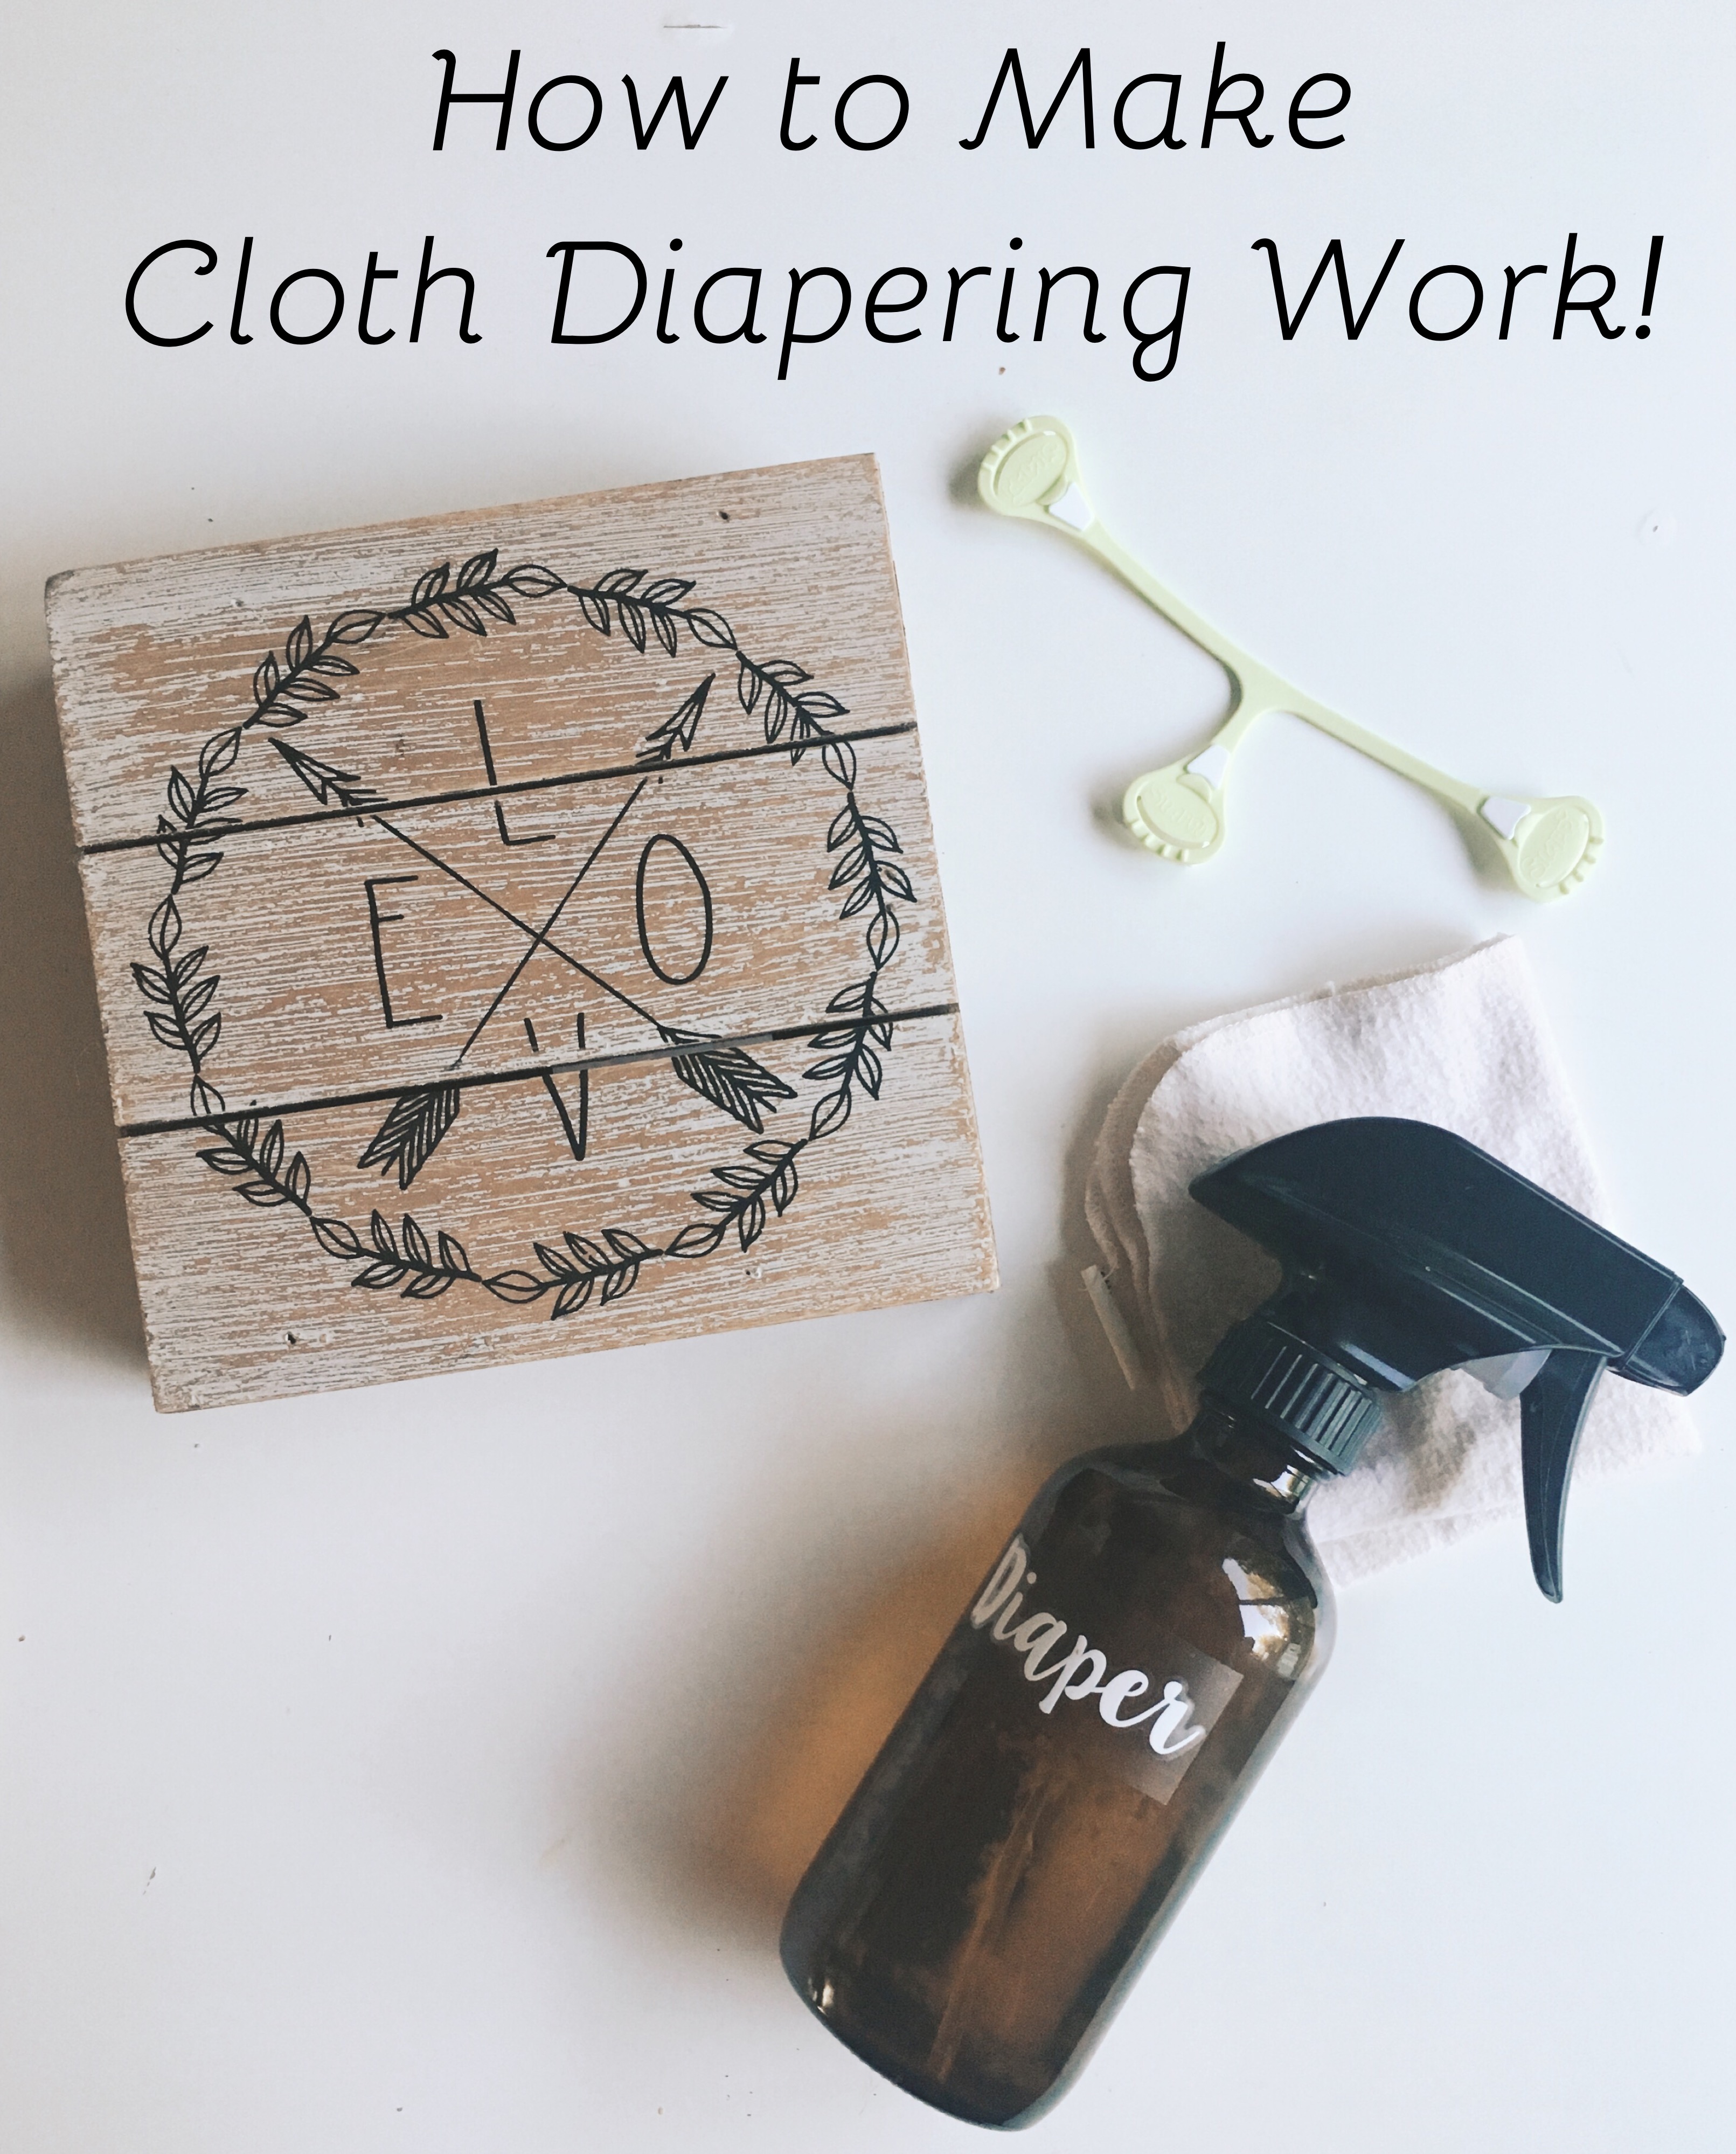 How to Make Cloth Diapering Work for you!